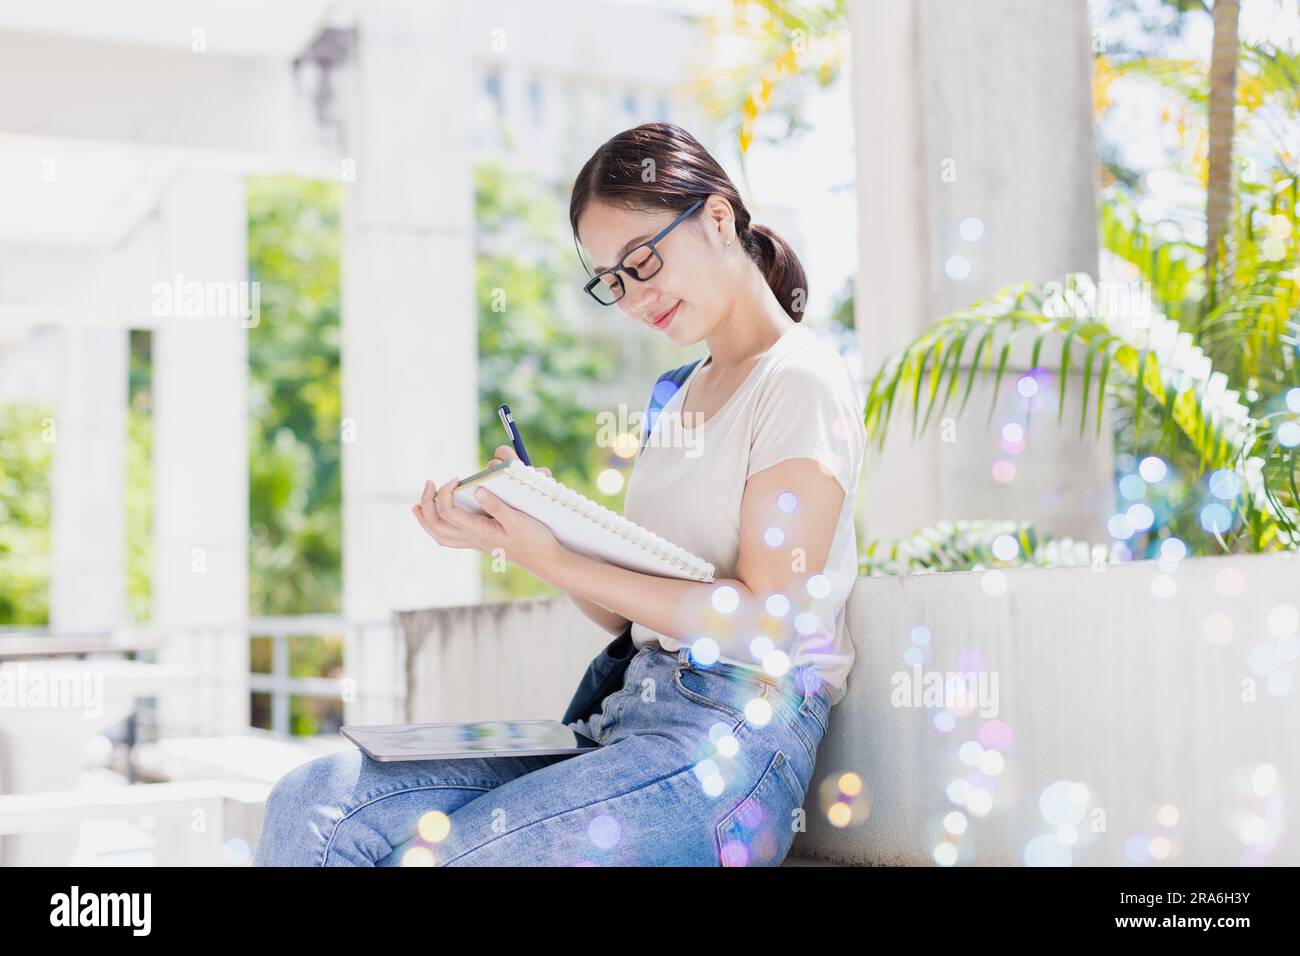 University teen girl happy smiling enjoy learning education. young woman with diary note pocket book Stock Photo